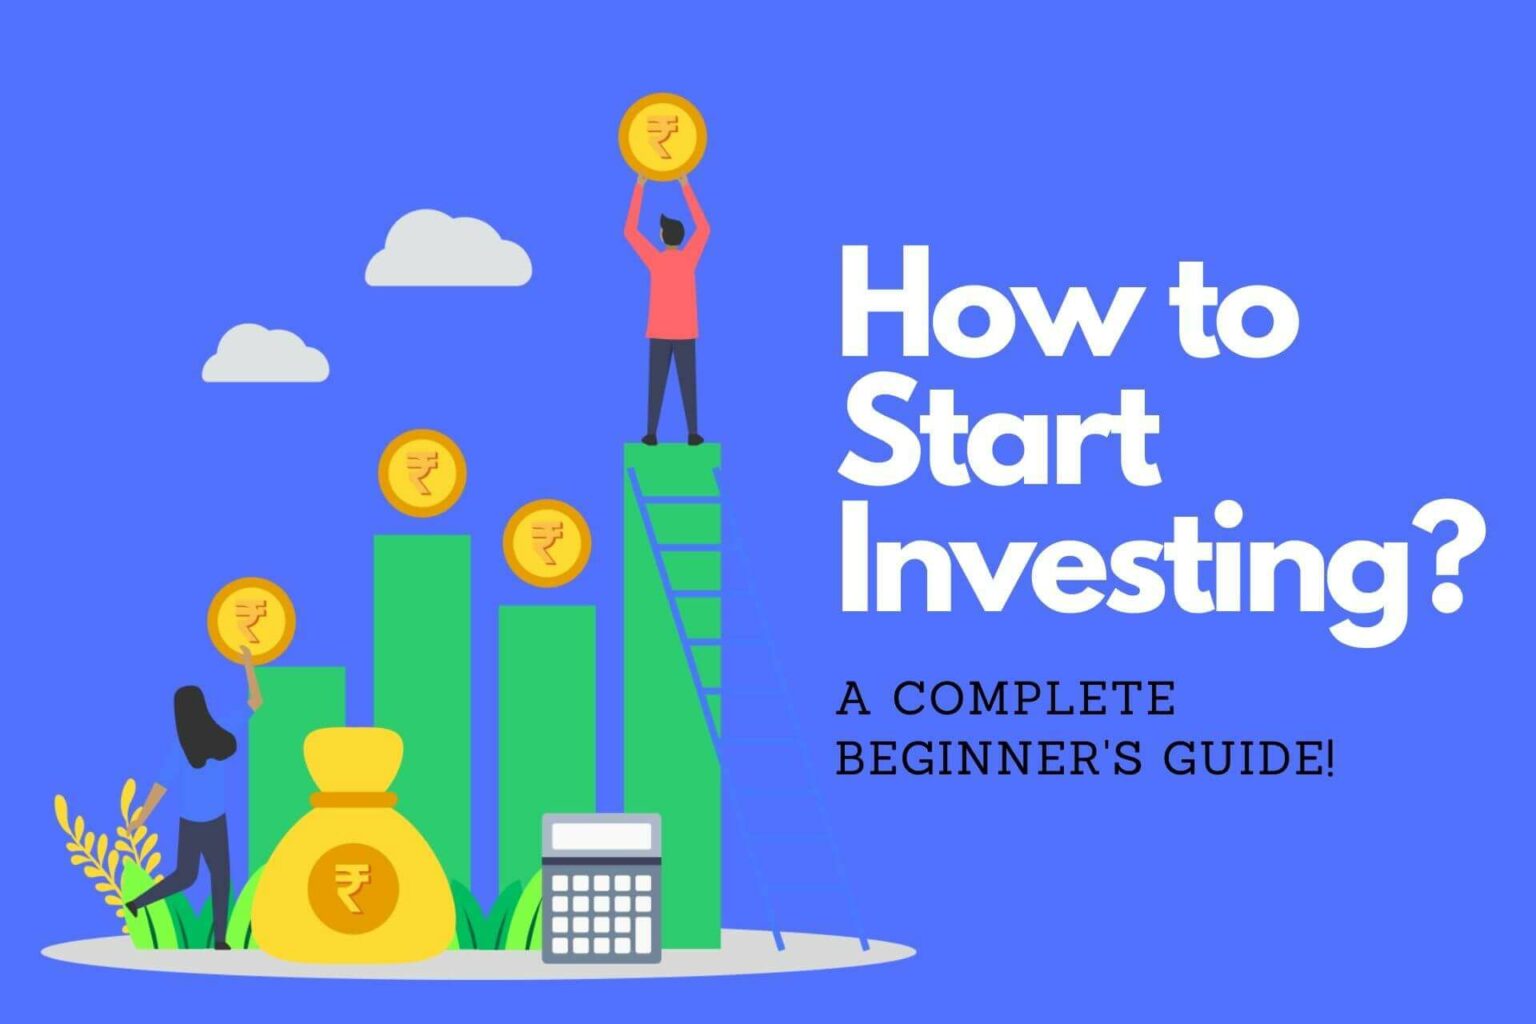 How to Start Investing As a Beginner